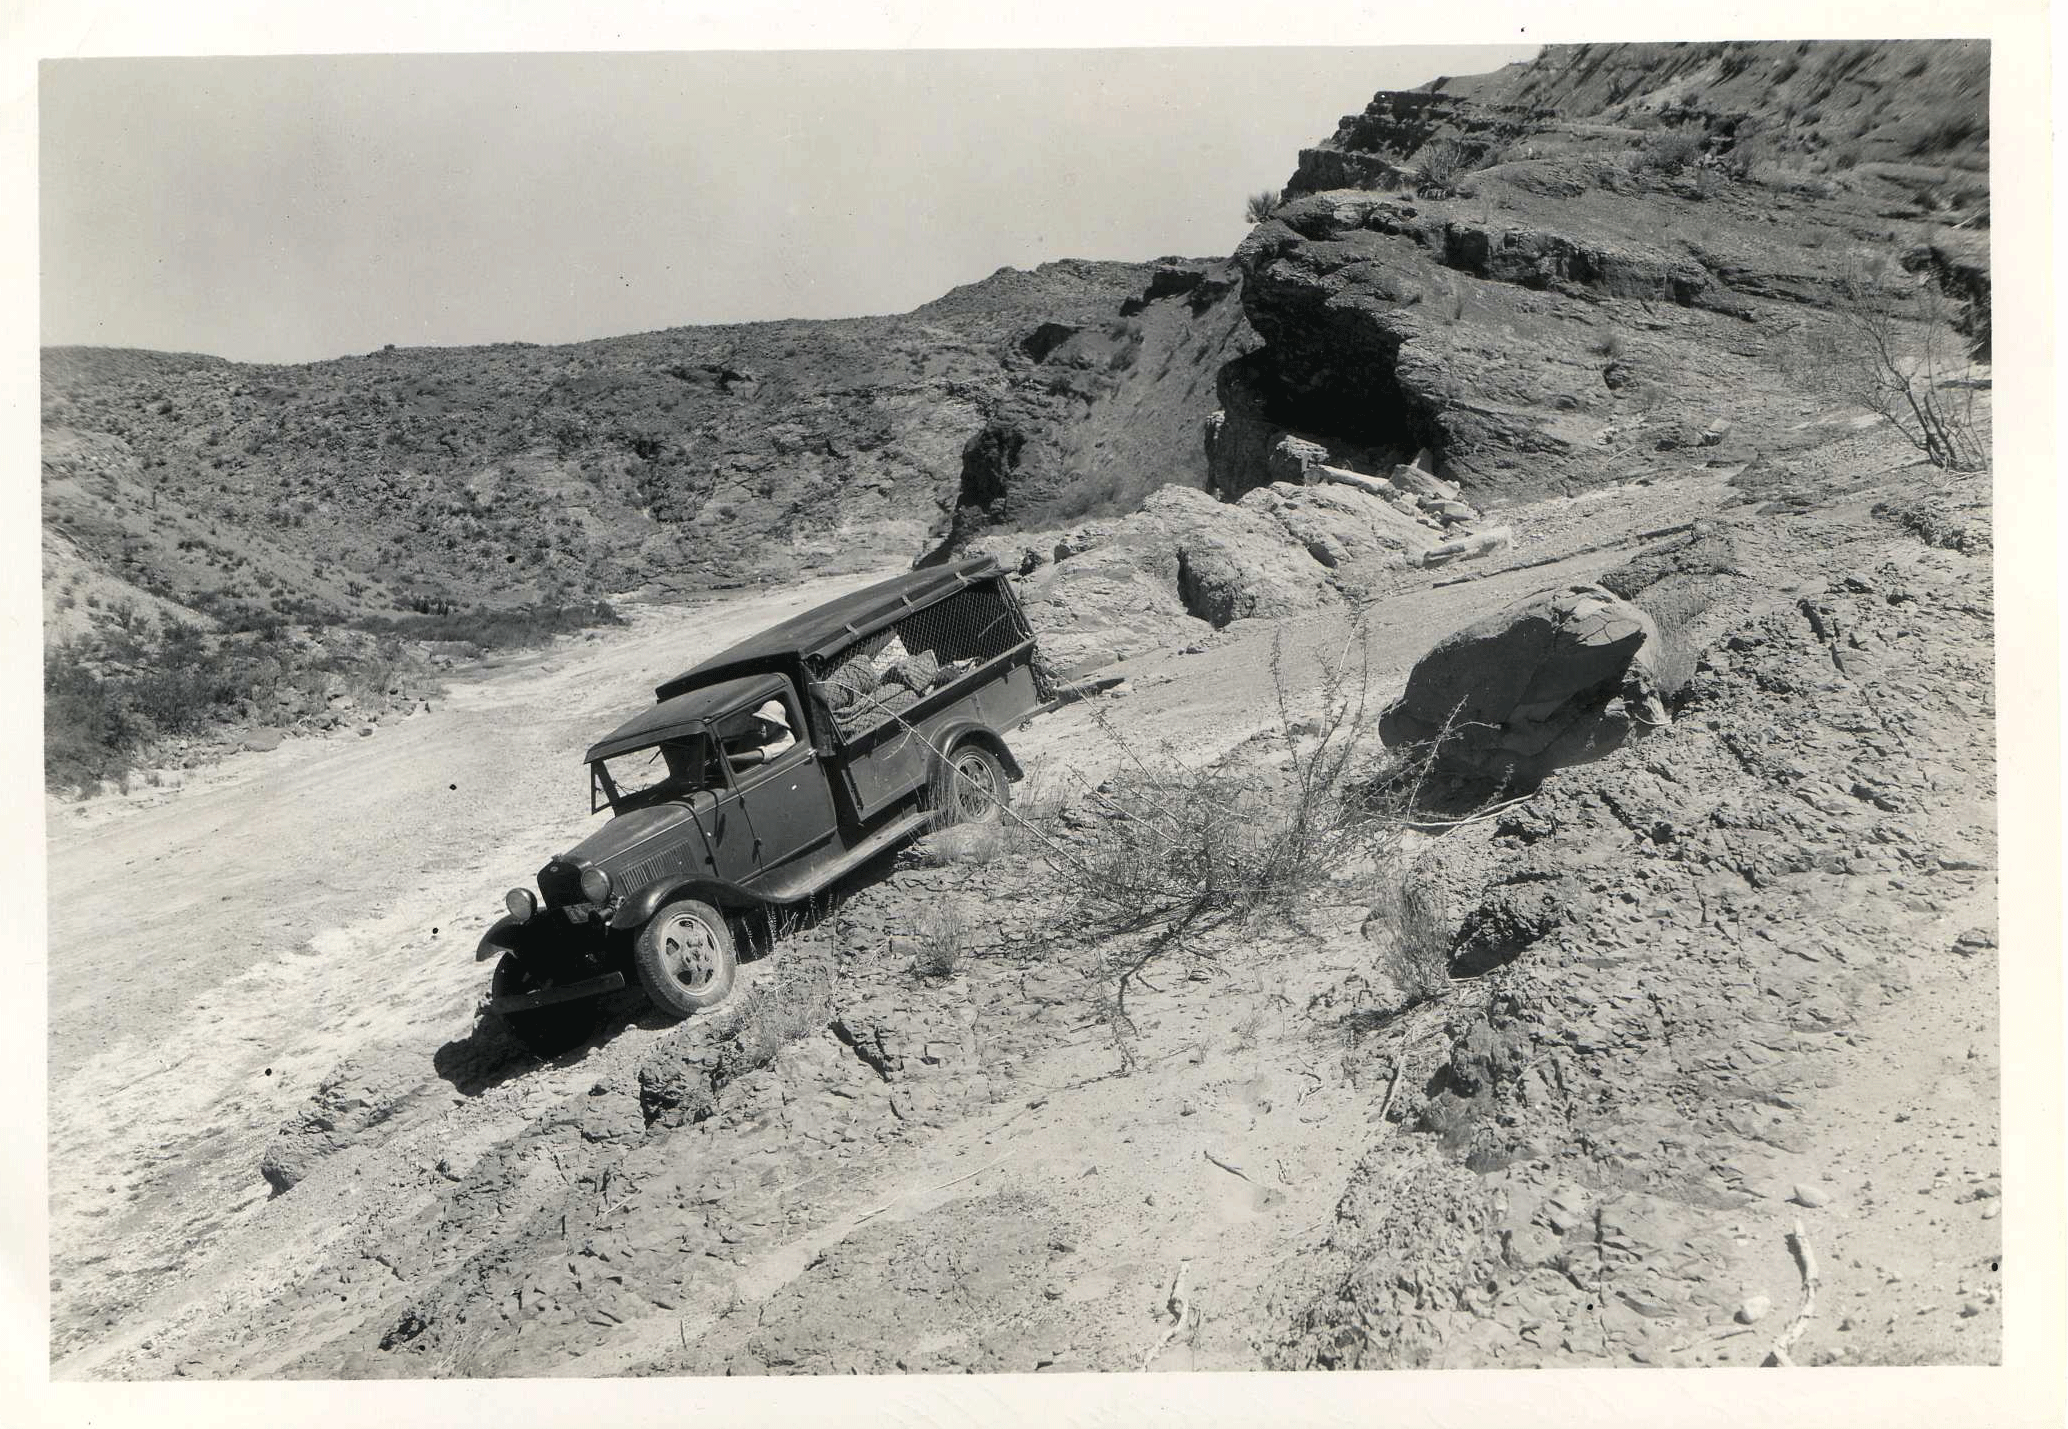 Photo of a truck driving through the desert on a dirt road.